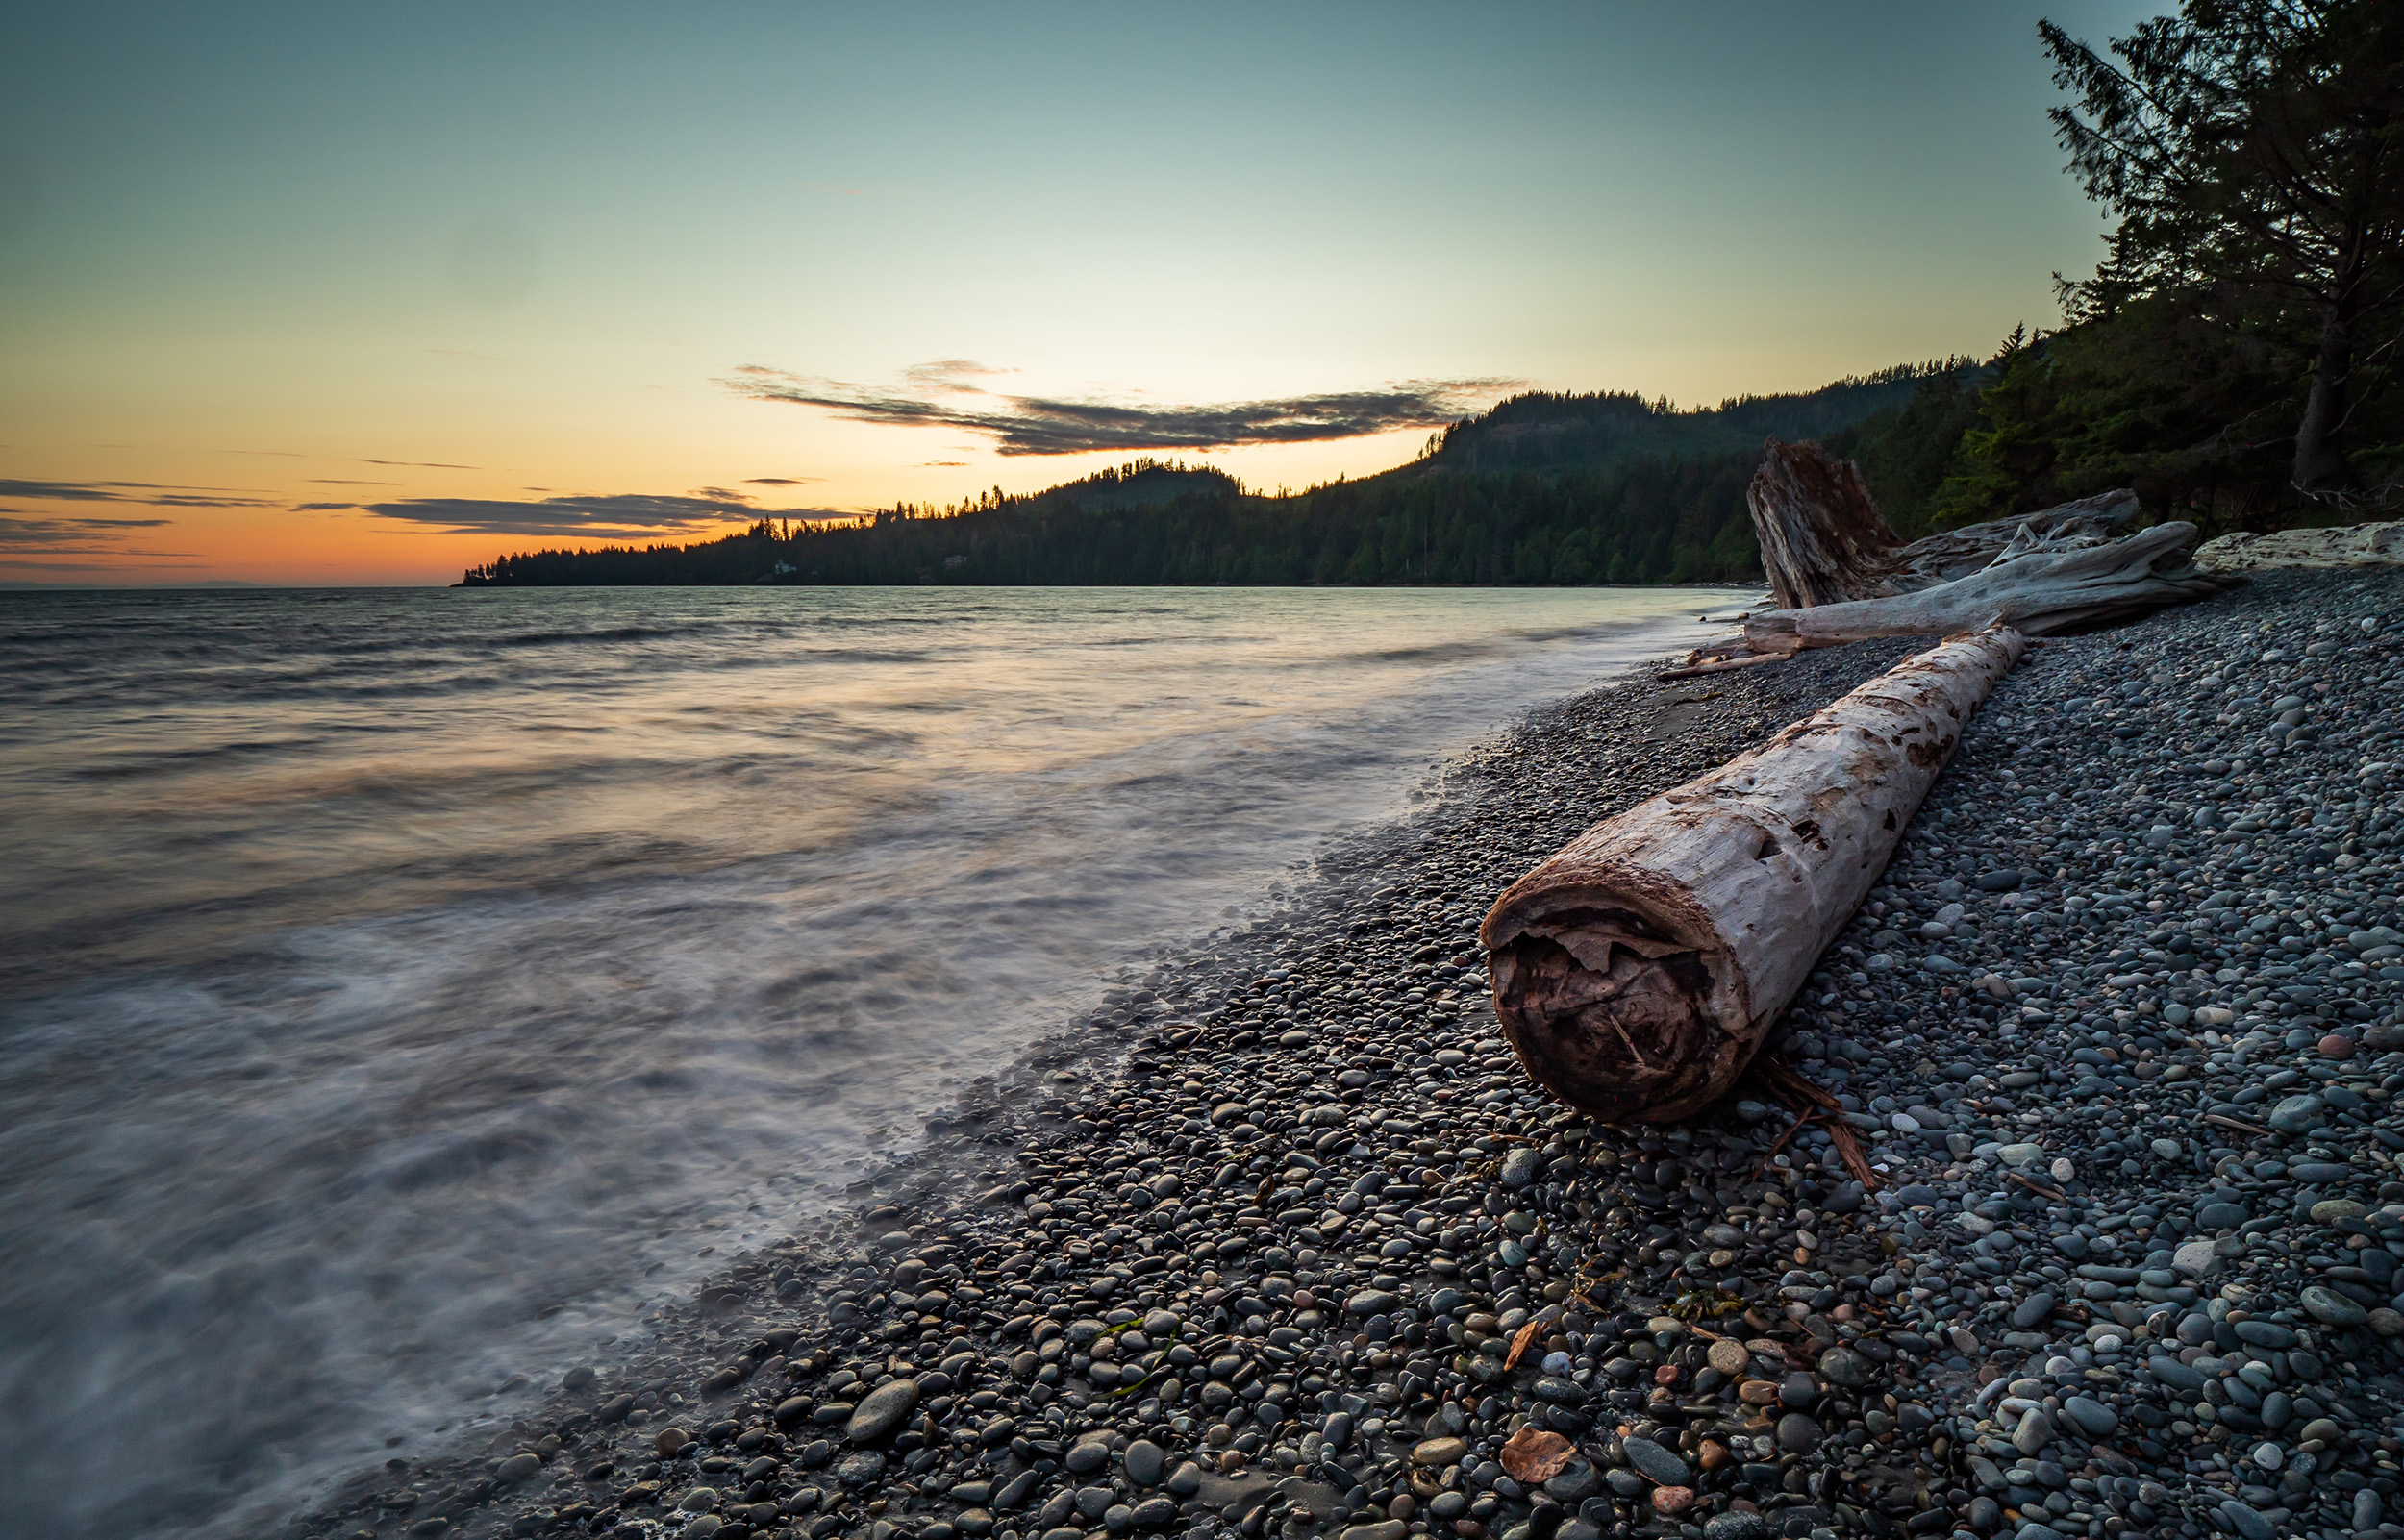 Fallen log lies on a rocky beach with a forest in the background